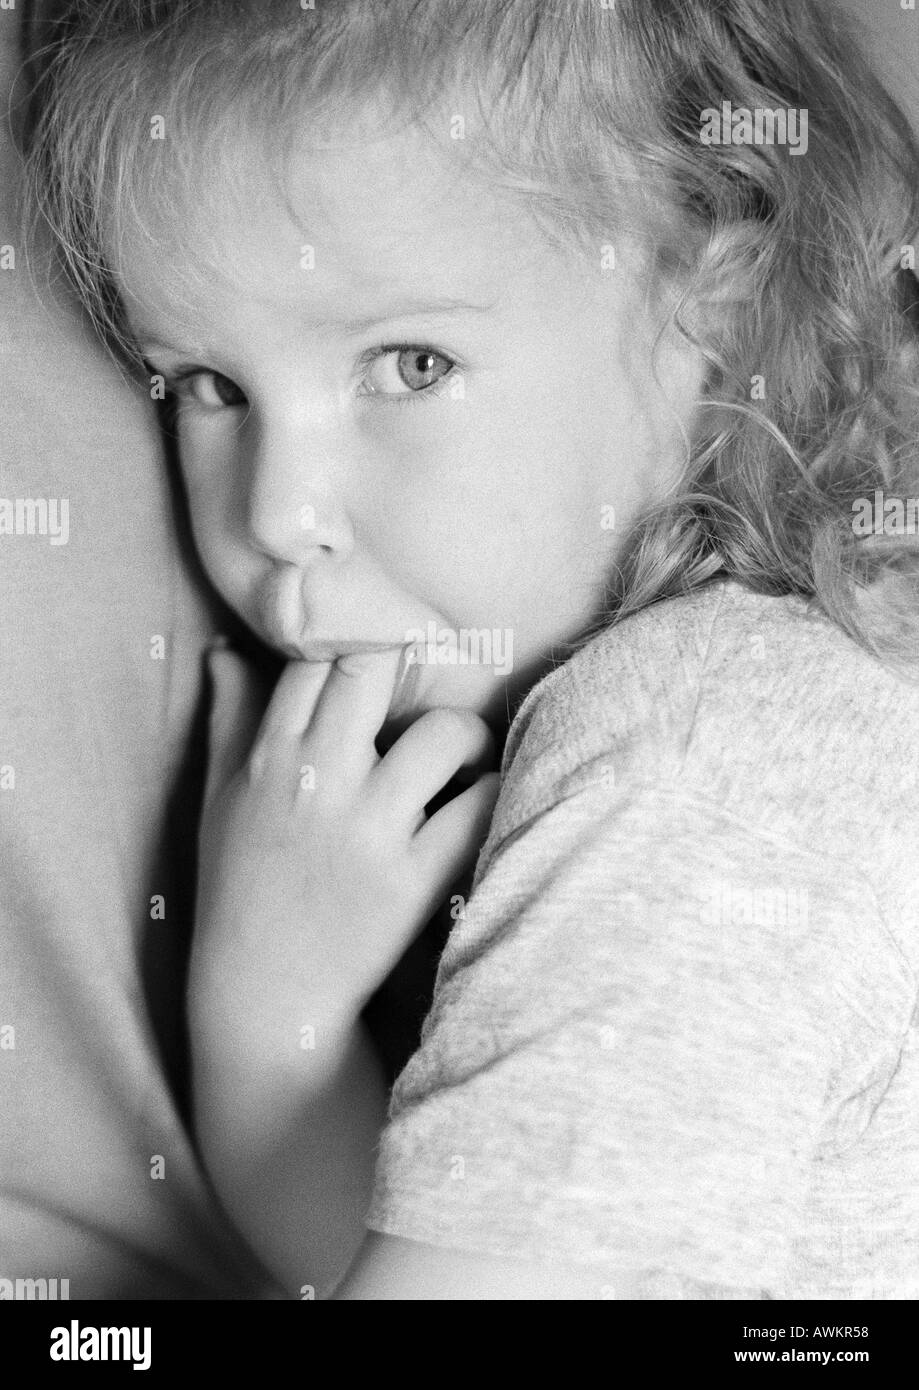 Girl with fingers in mouth, portrait, b&w Stock Photo